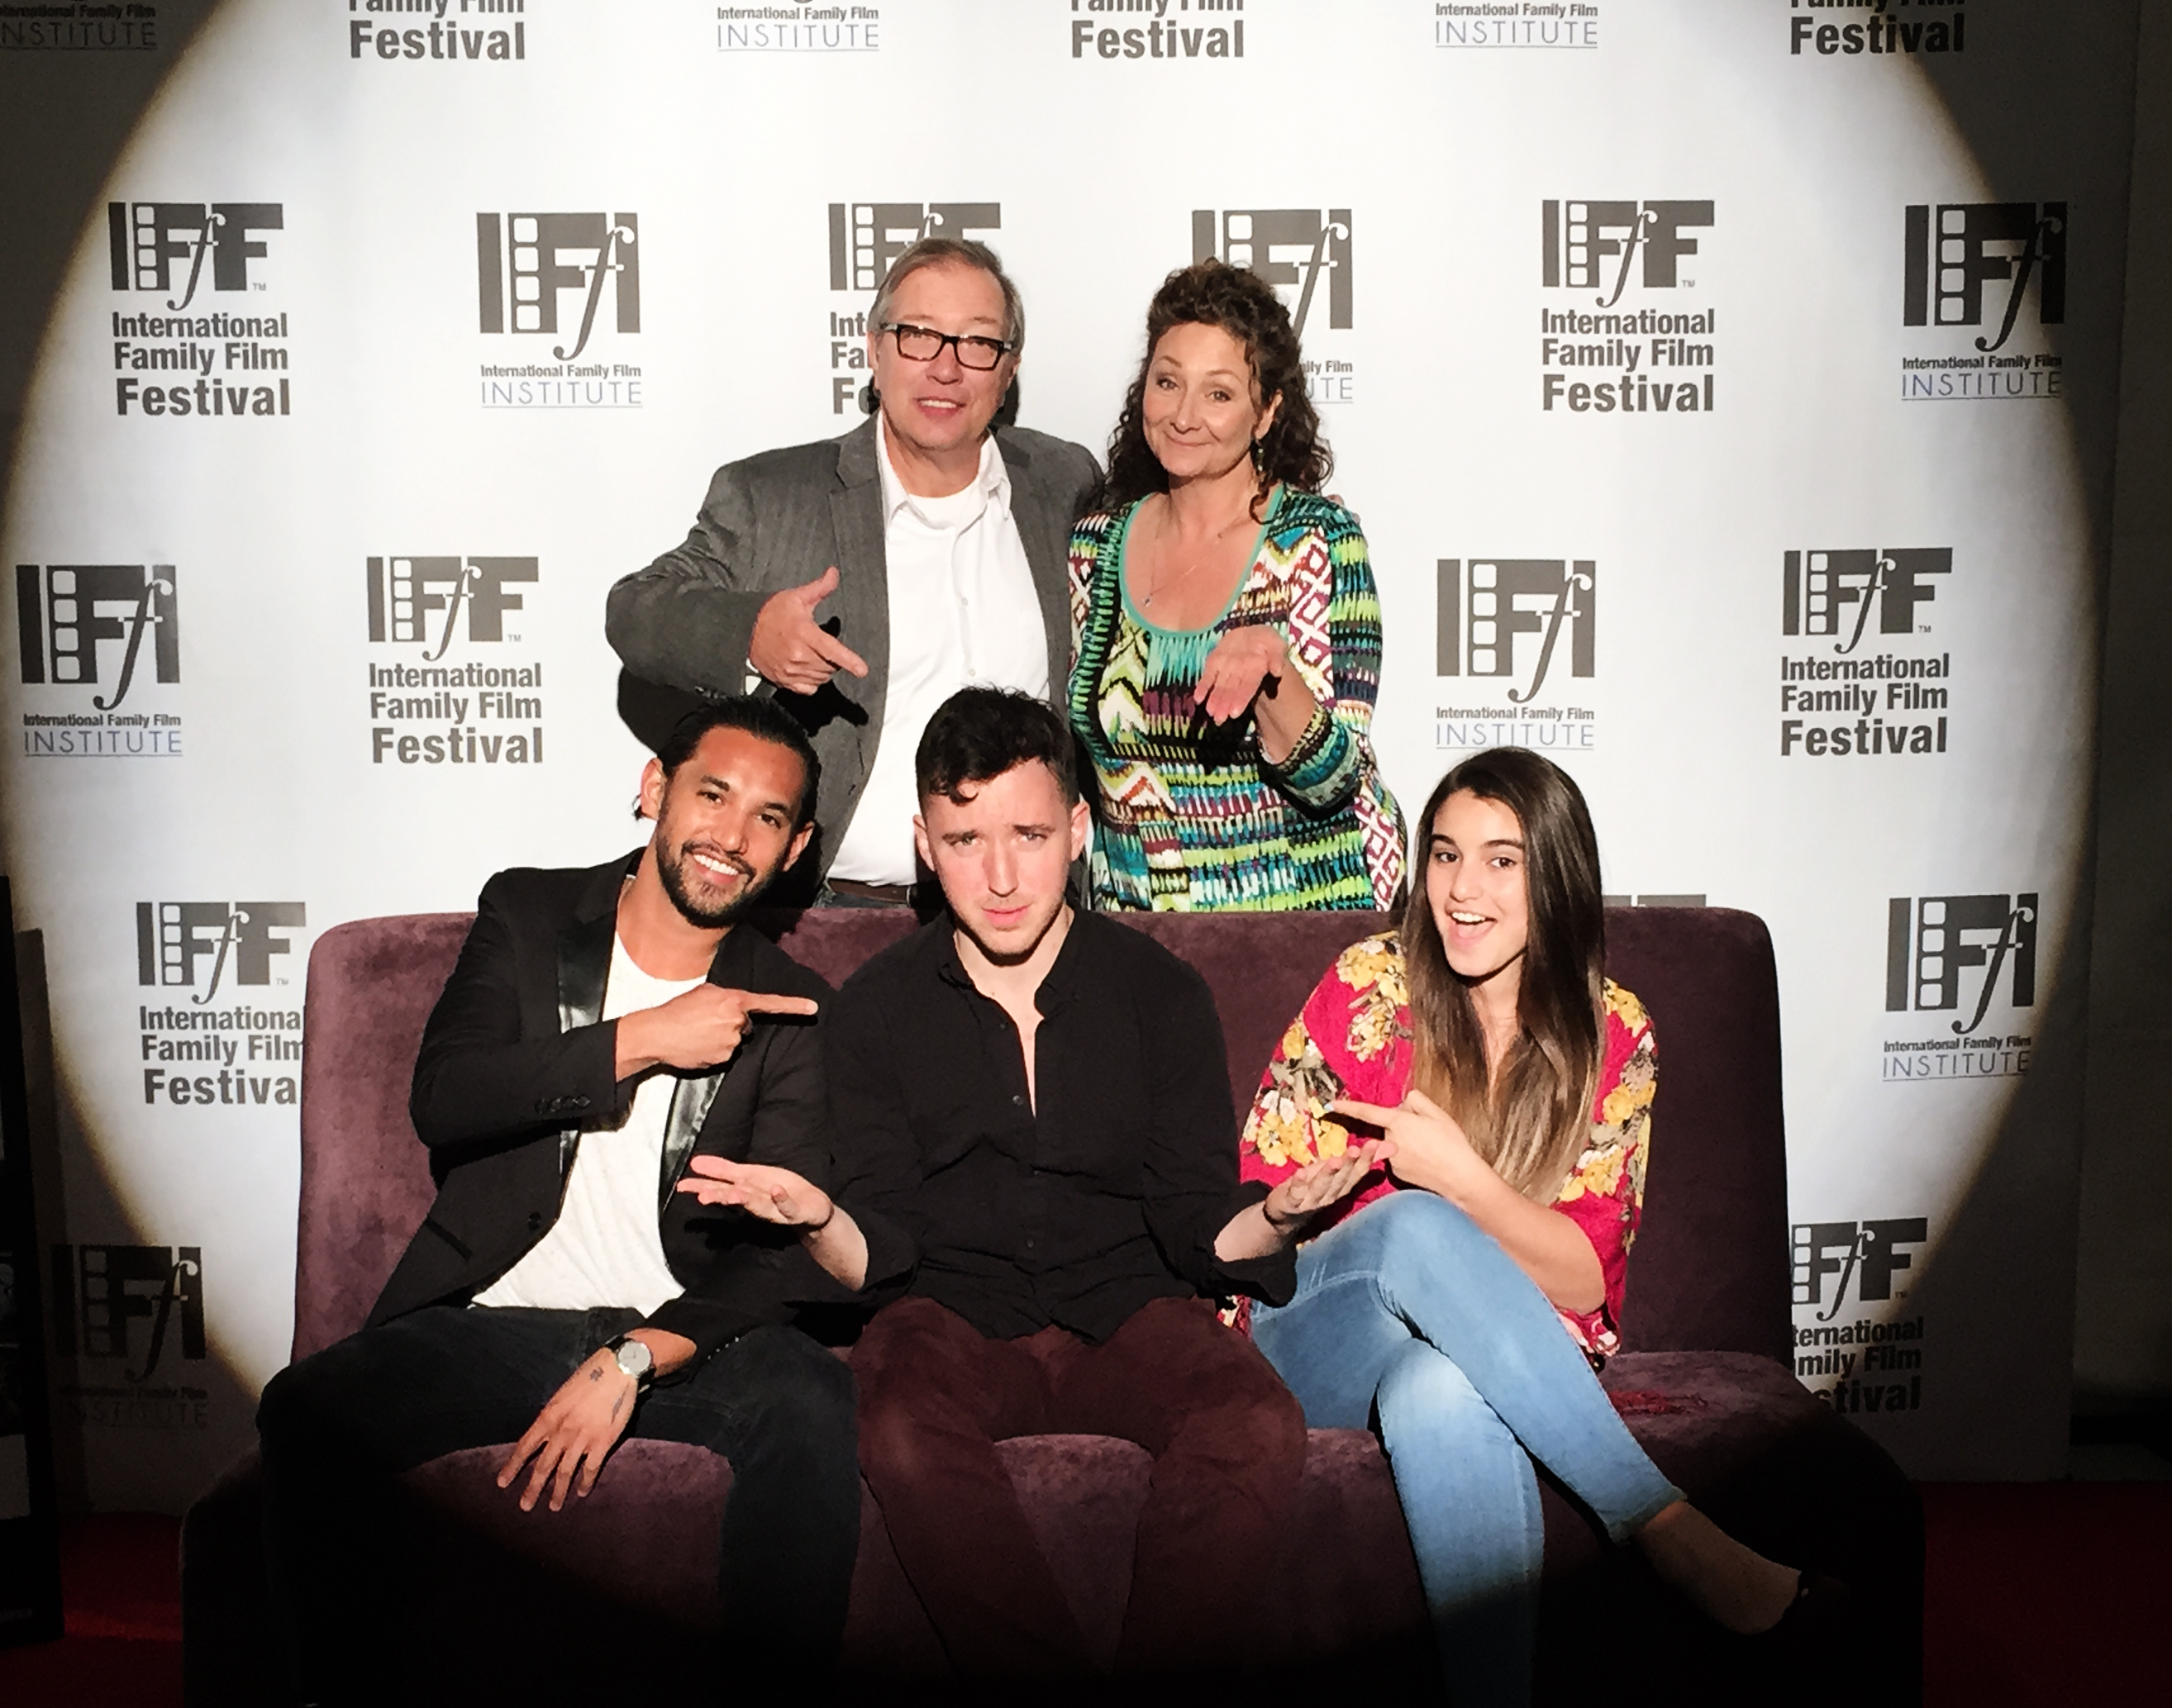 The Cast of Don't Tell Mom and Dad on the Red Carpet at the International Family Film Festival